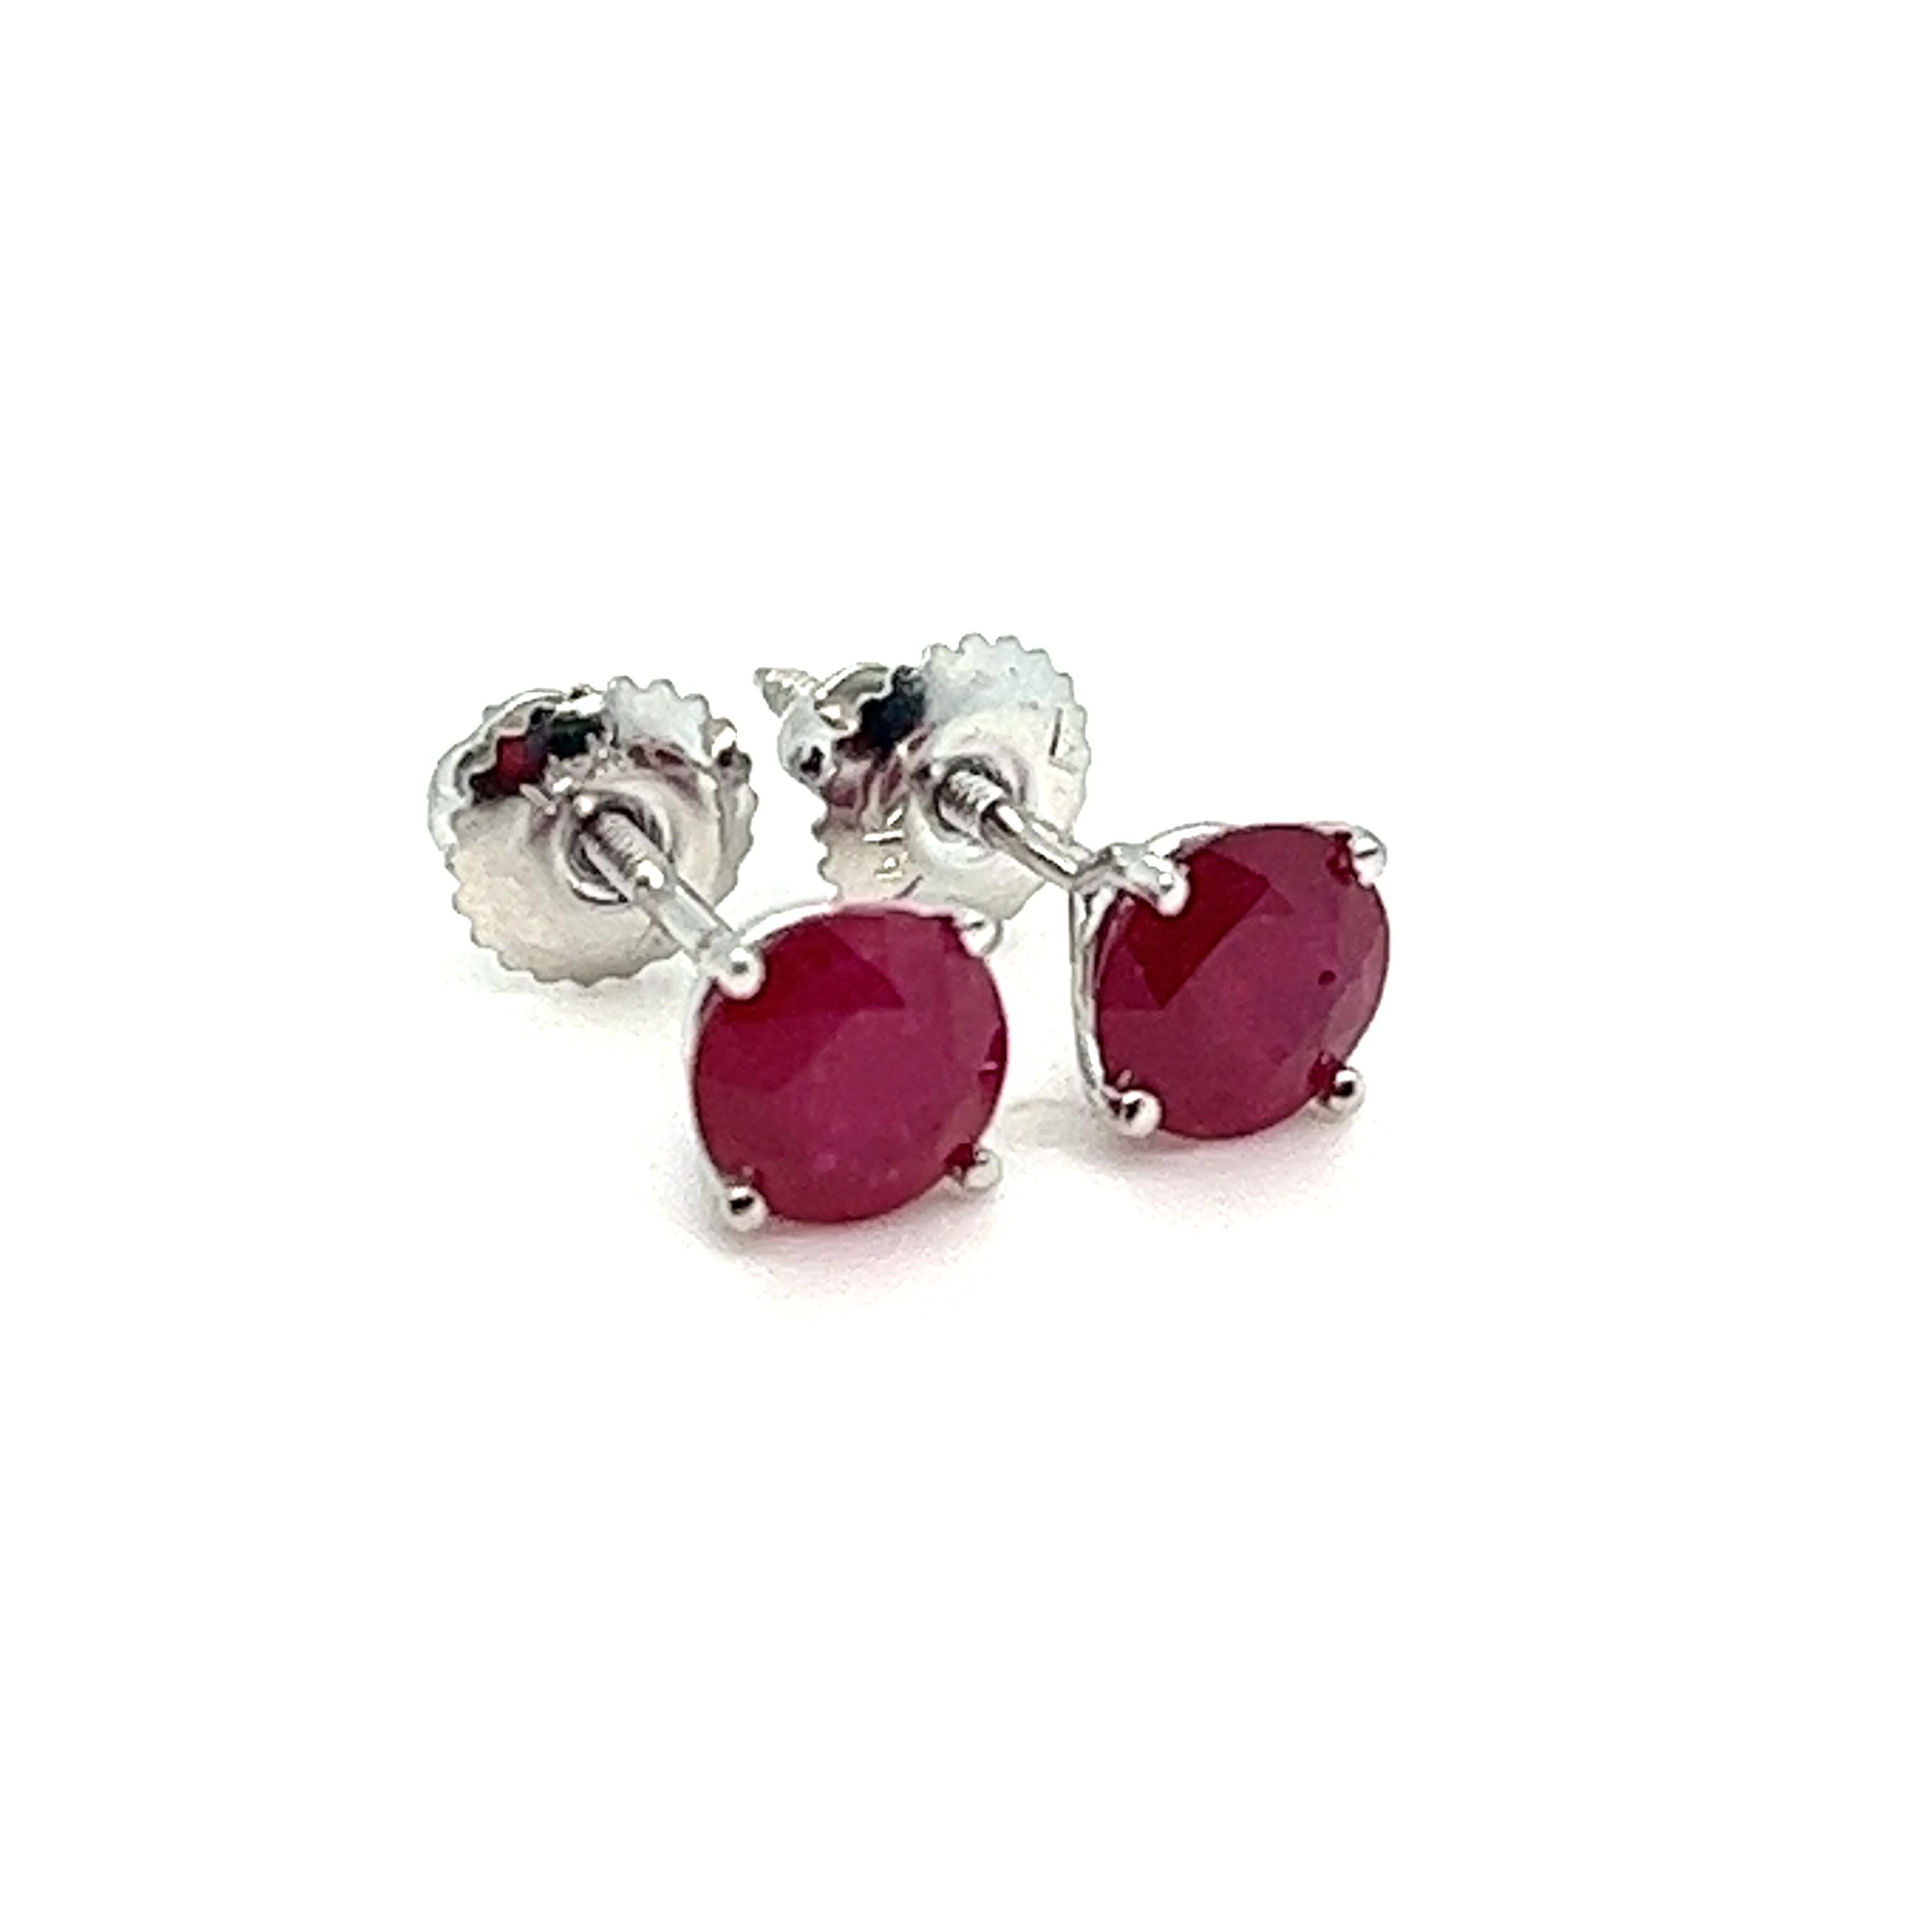 Contemporary 2 Carats Natural Ruby Stud Earring in 14K White Gold, Screw-Backs. For Sale